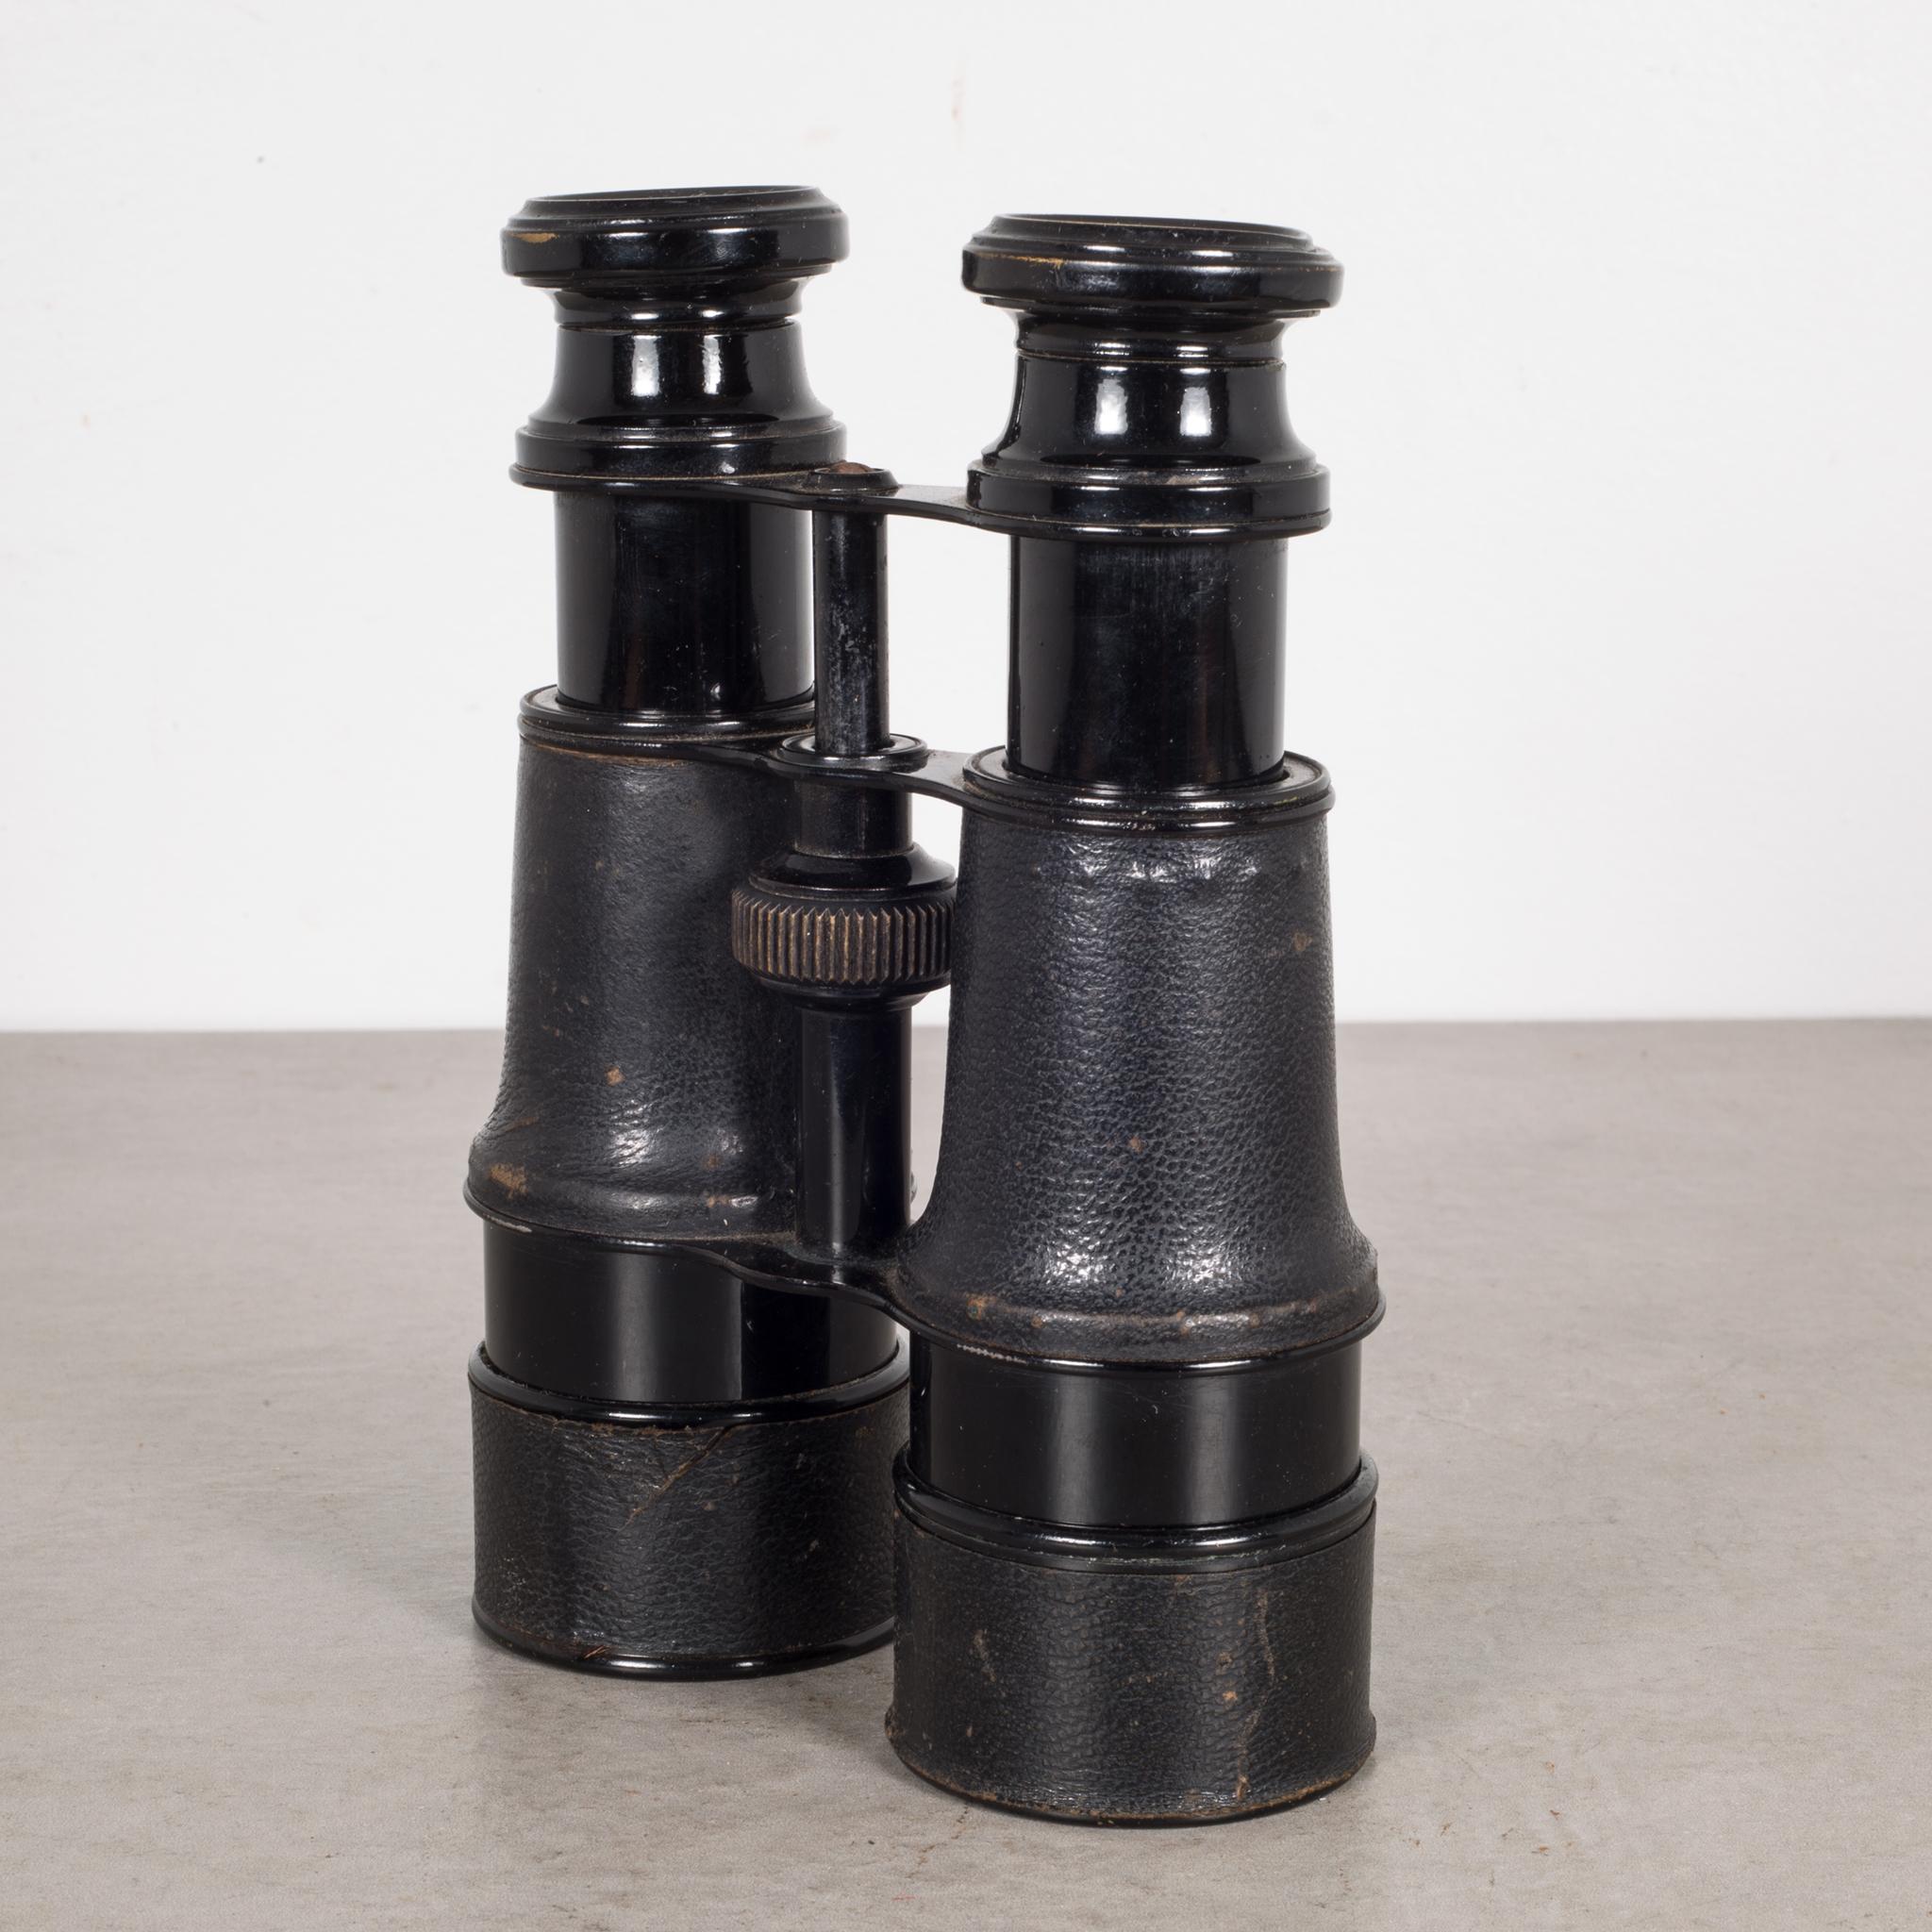 About

This is an original pair of French expandable binoculars. They are marked on each eyepiece with 